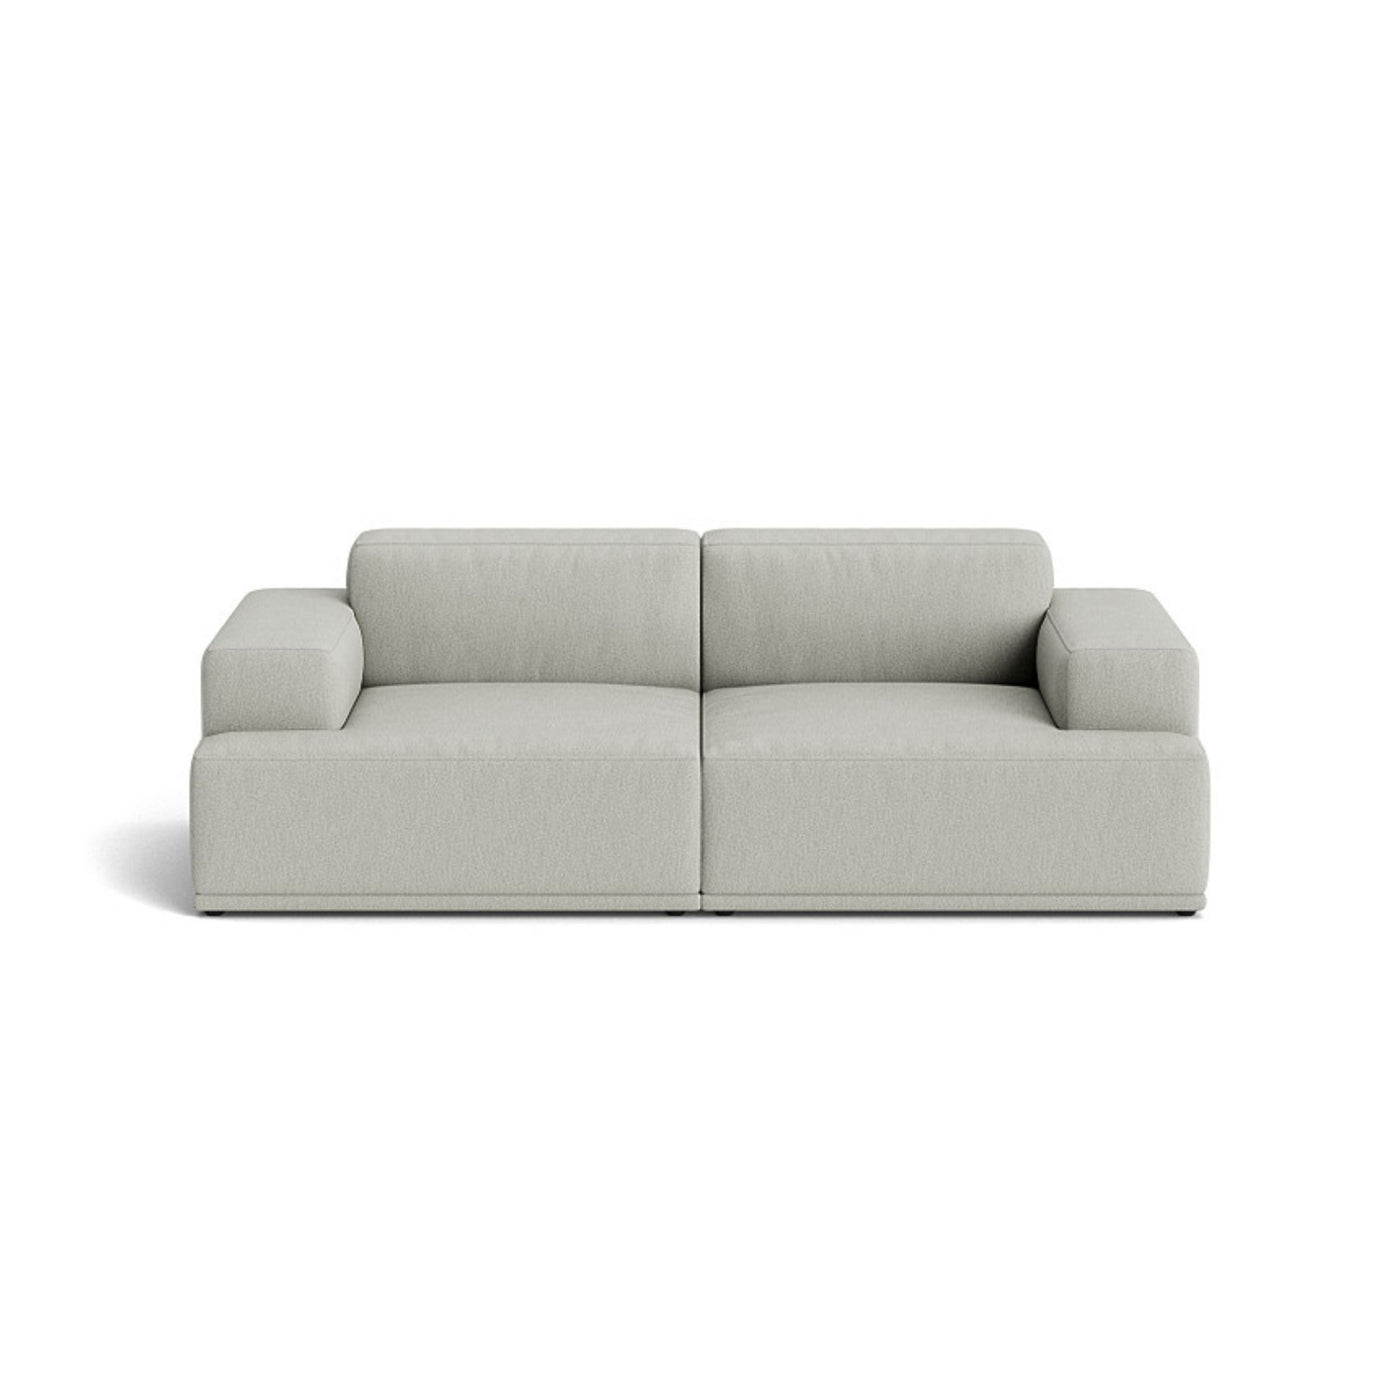 Muuto Connect Soft Modular 2 Seater Sofa, configuration 1. made-to-order from someday designs. #colour_clay-12